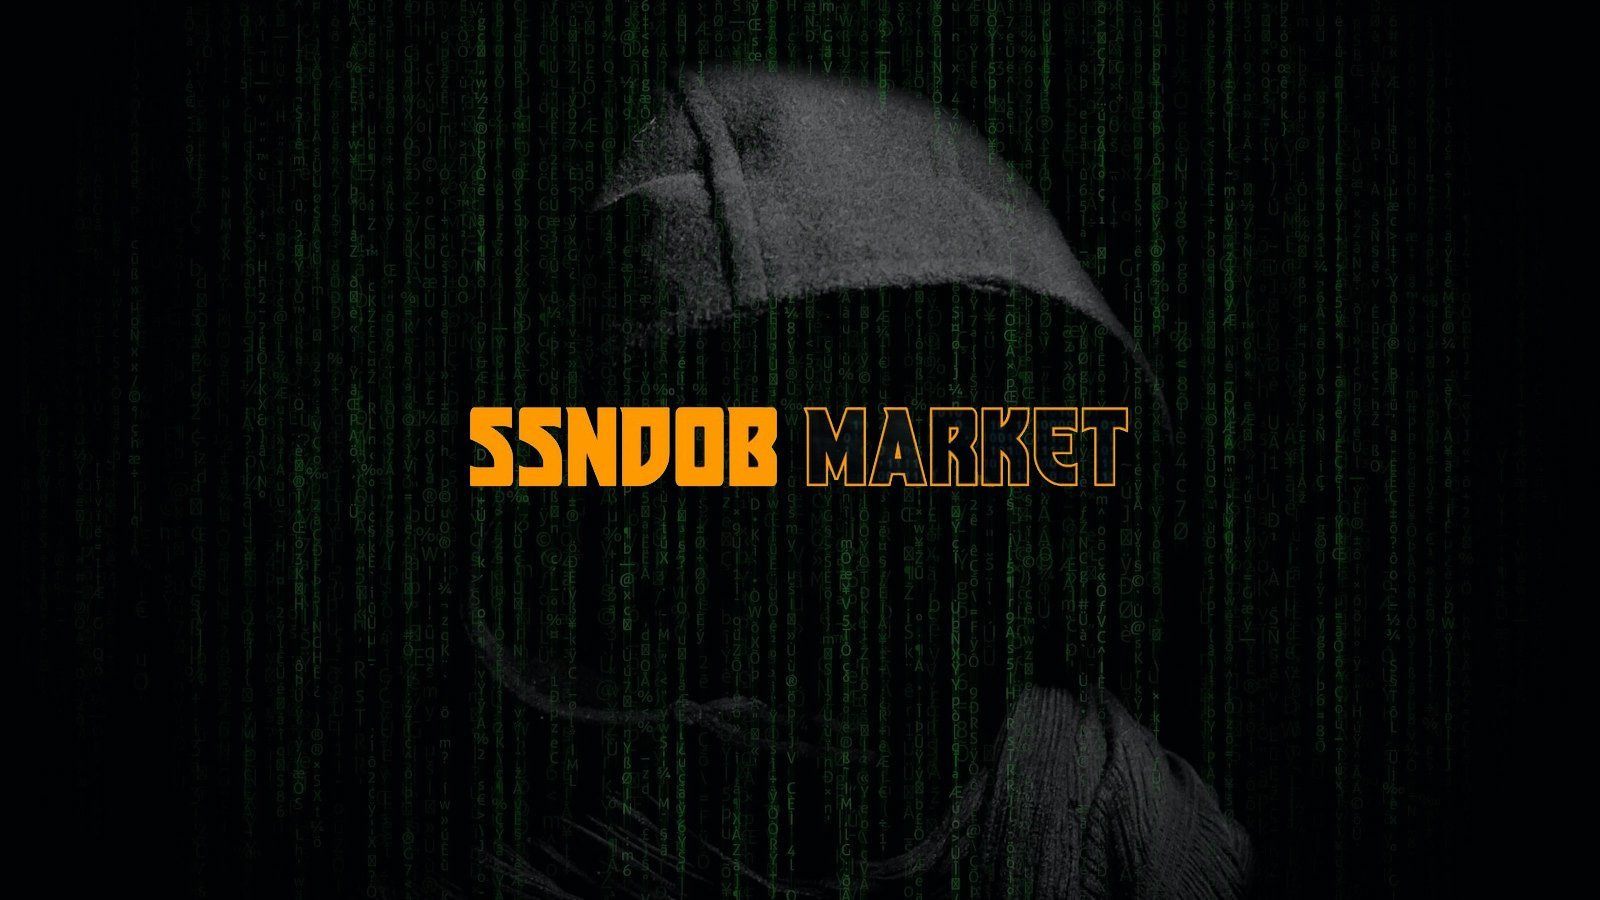 SSNDOB cybercrime market admin faces 15 years after pleading guilty – Source: www.bleepingcomputer.com